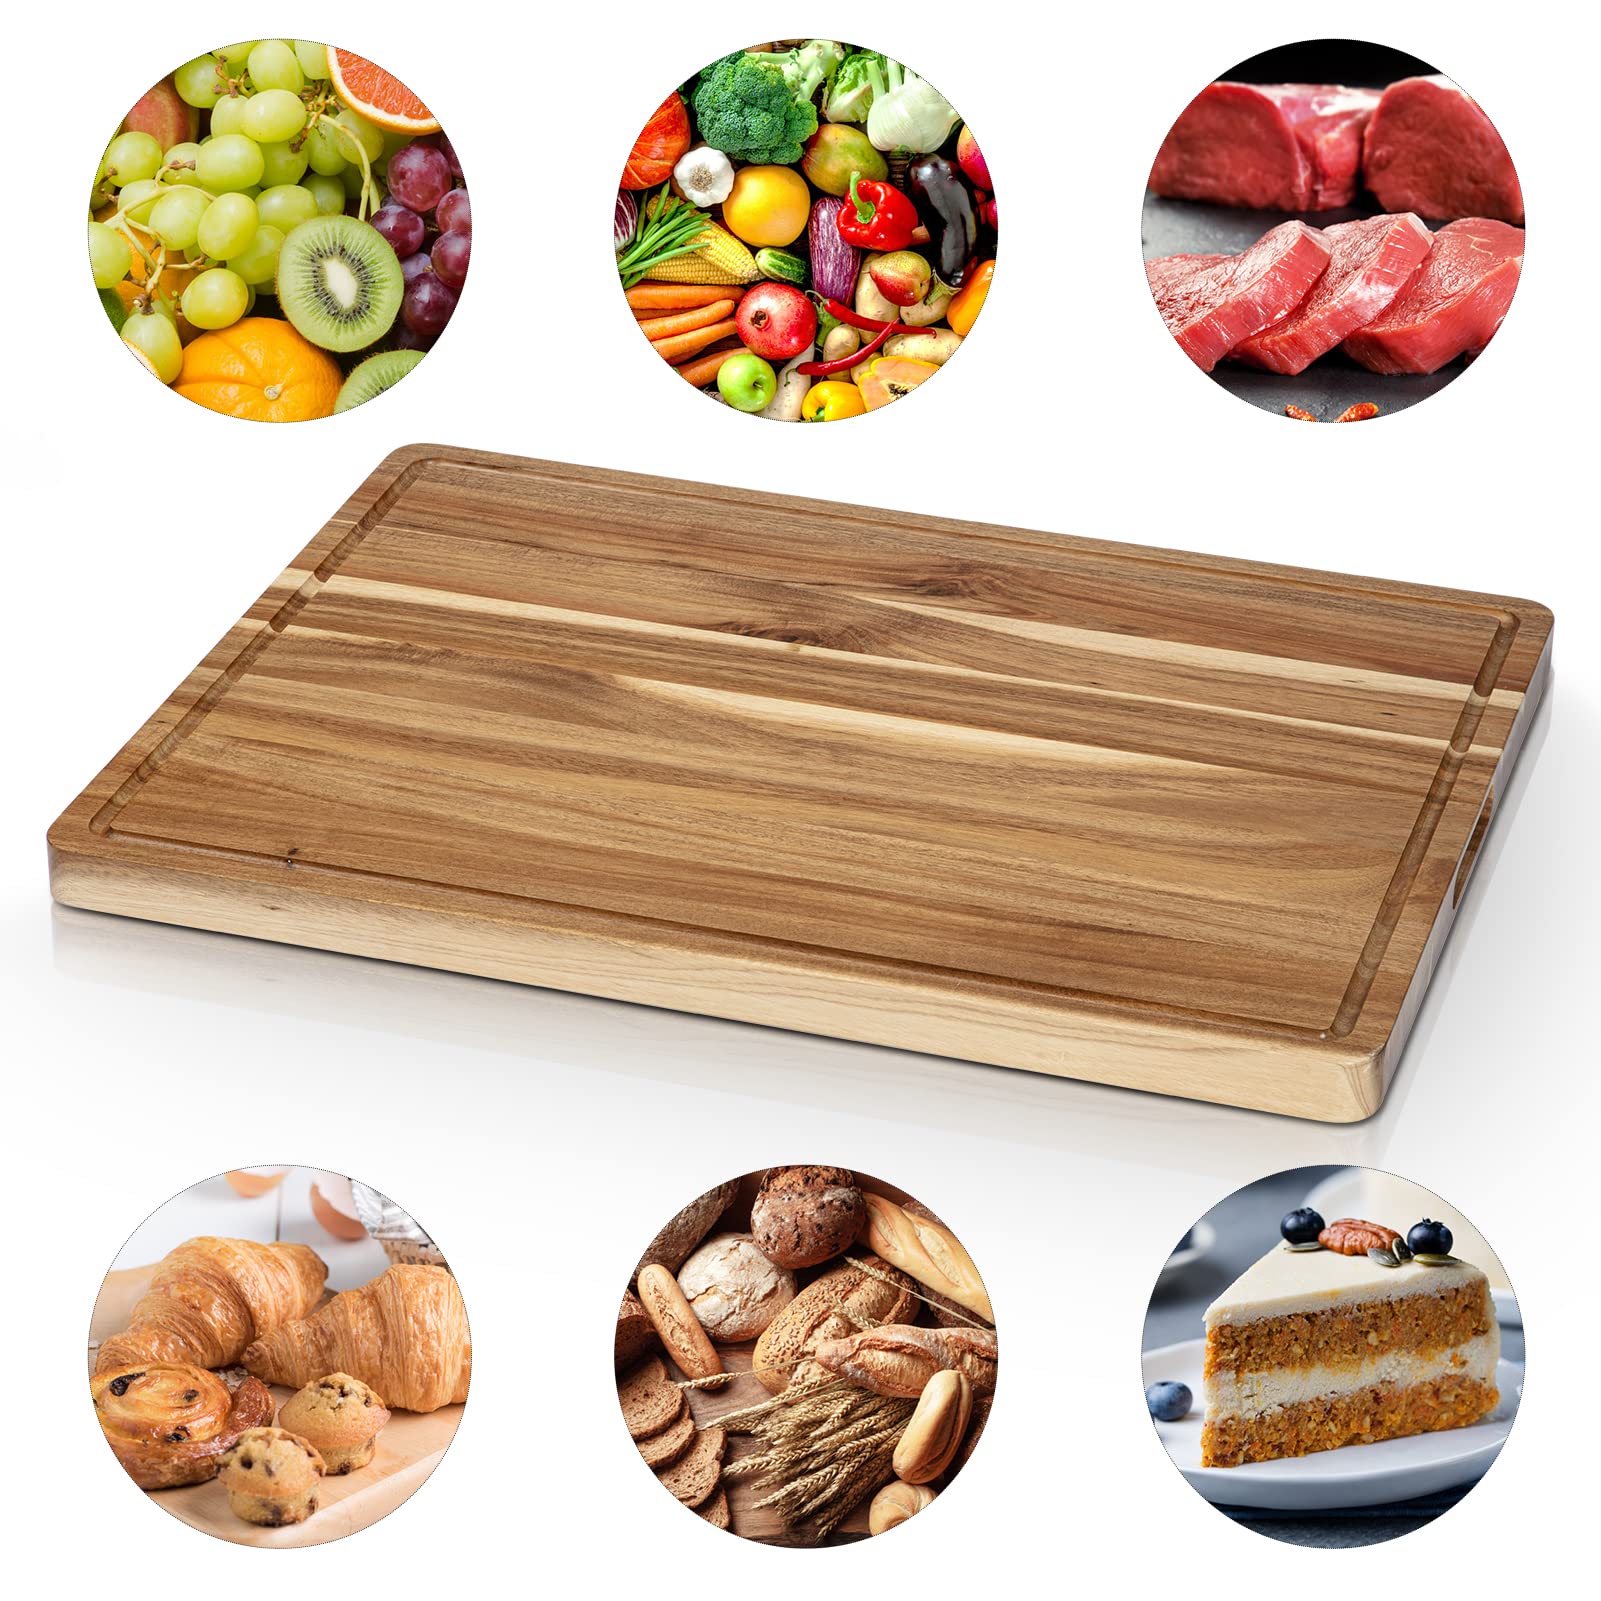 Fashionwu Extra Large Acacia Wood Cutting Board, 24 x 18 Inch Kitchen Cutting Board with Juice Slot and Handles, Reversible Wood Block Butcher Block Cutting Board for Meats, Vegetables and Cheeses